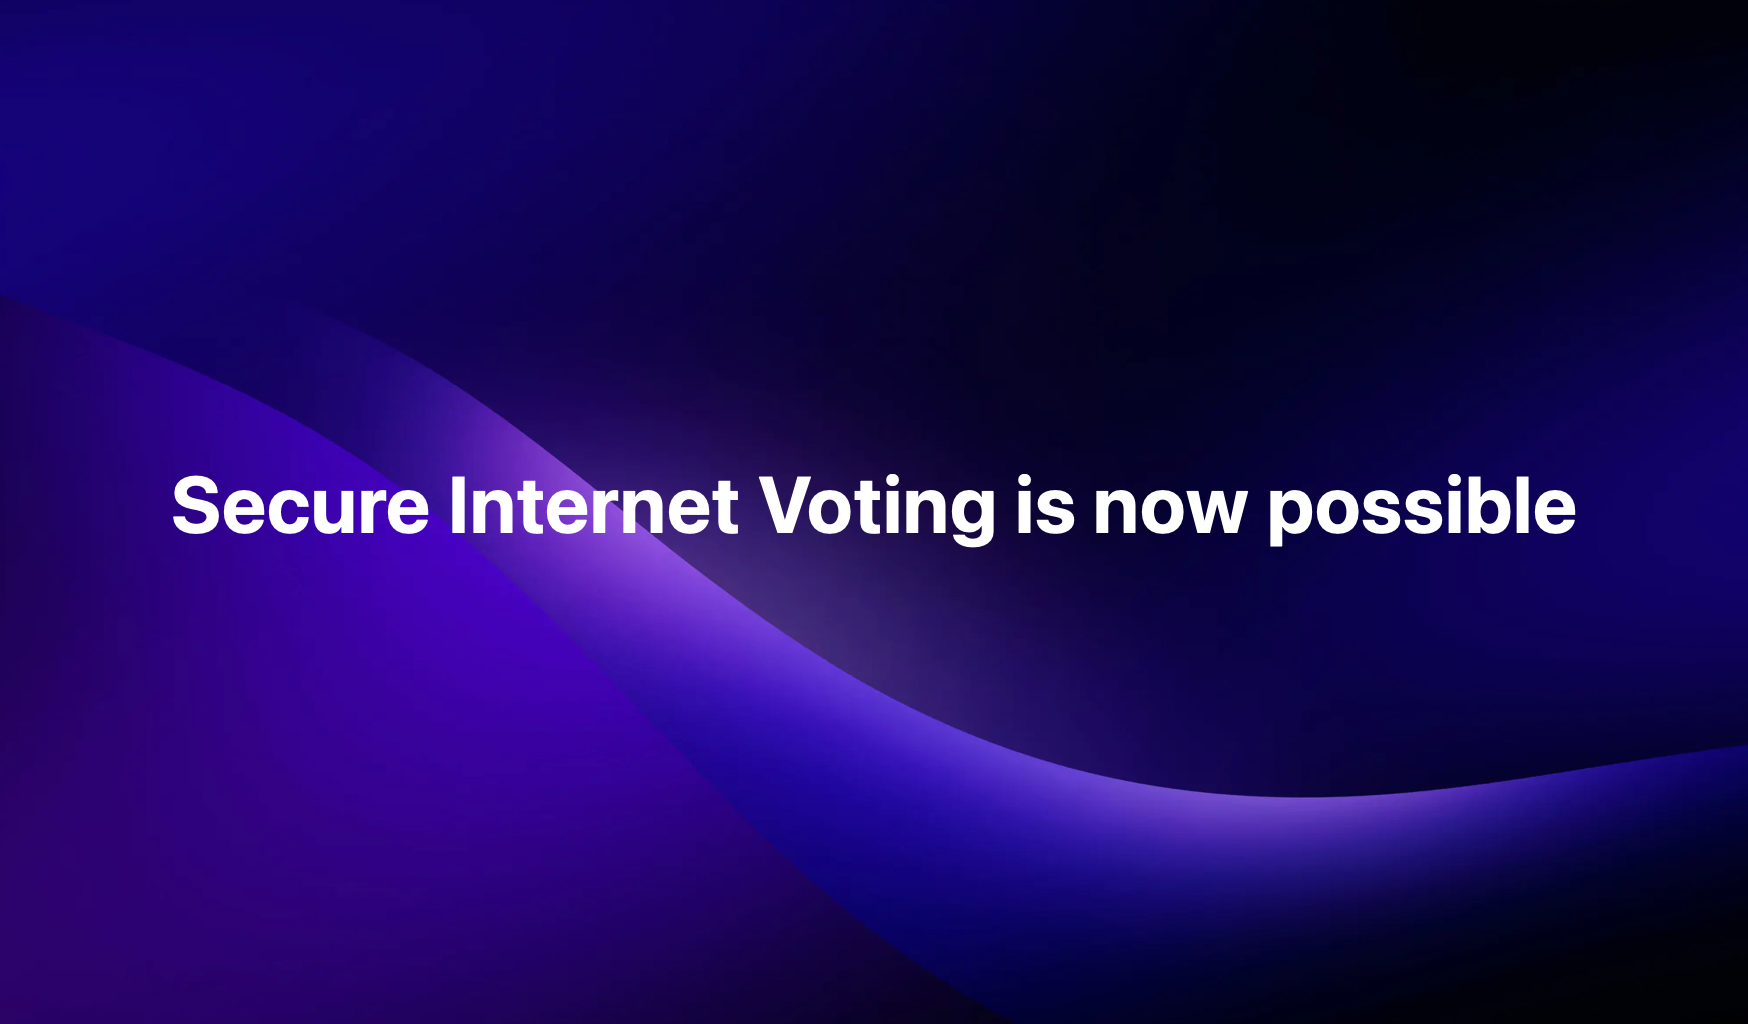 Secure Internet Voting is now possible